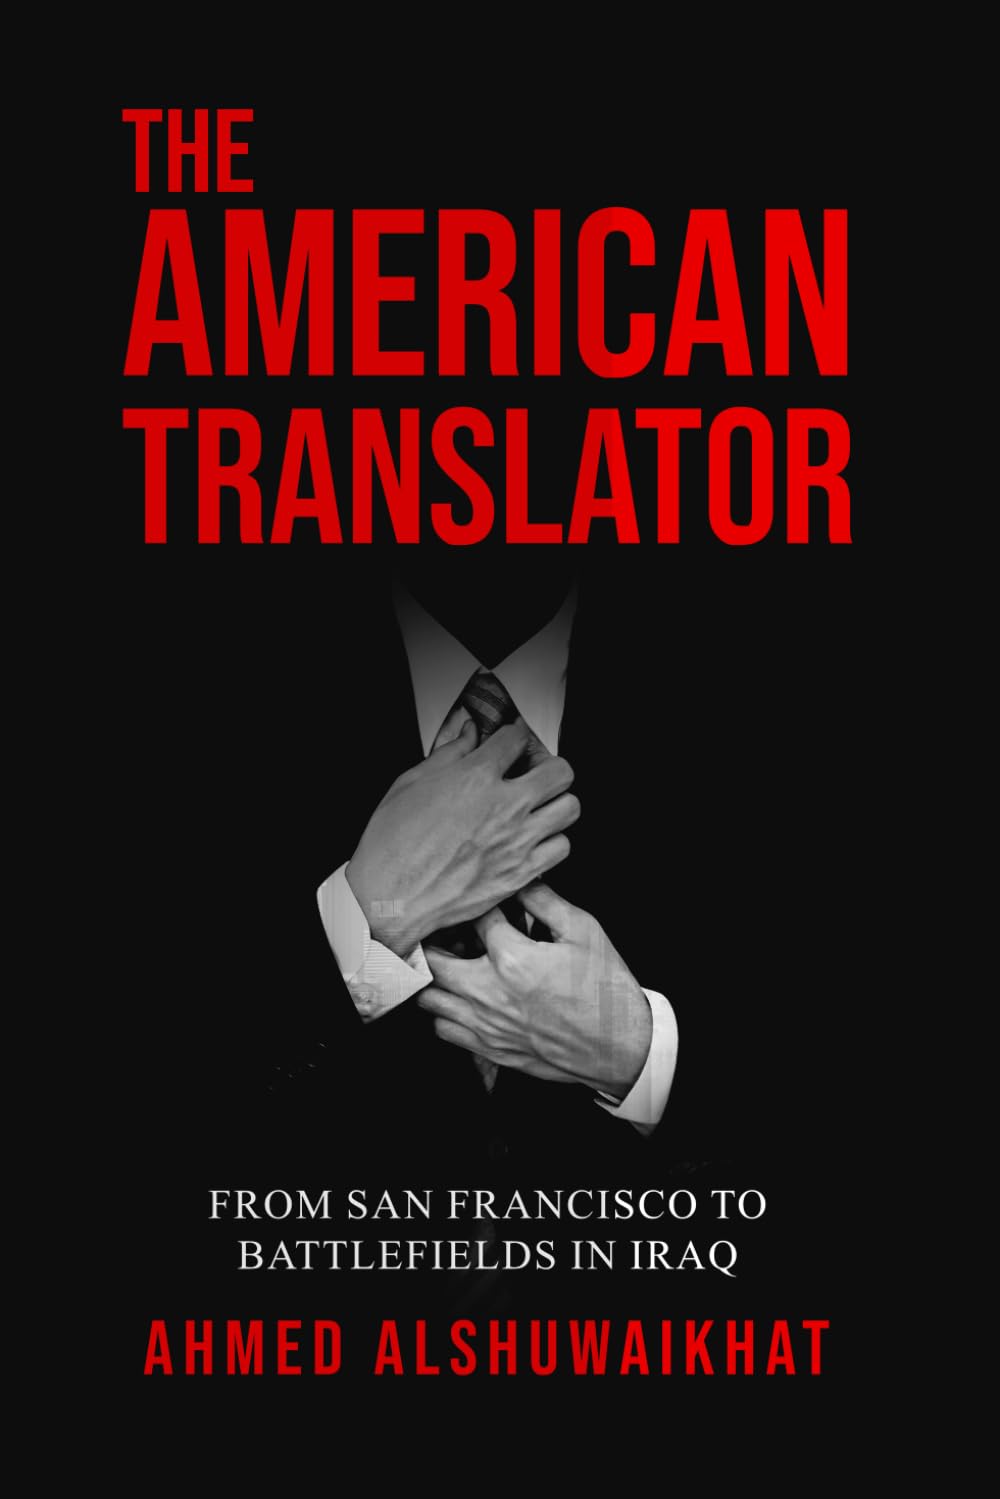 Acclaimed Author Ahmed Alshuwaikhat Makes Debut with "The American Translator": A Genre-Bending Exploration of War, Identity, and Hope